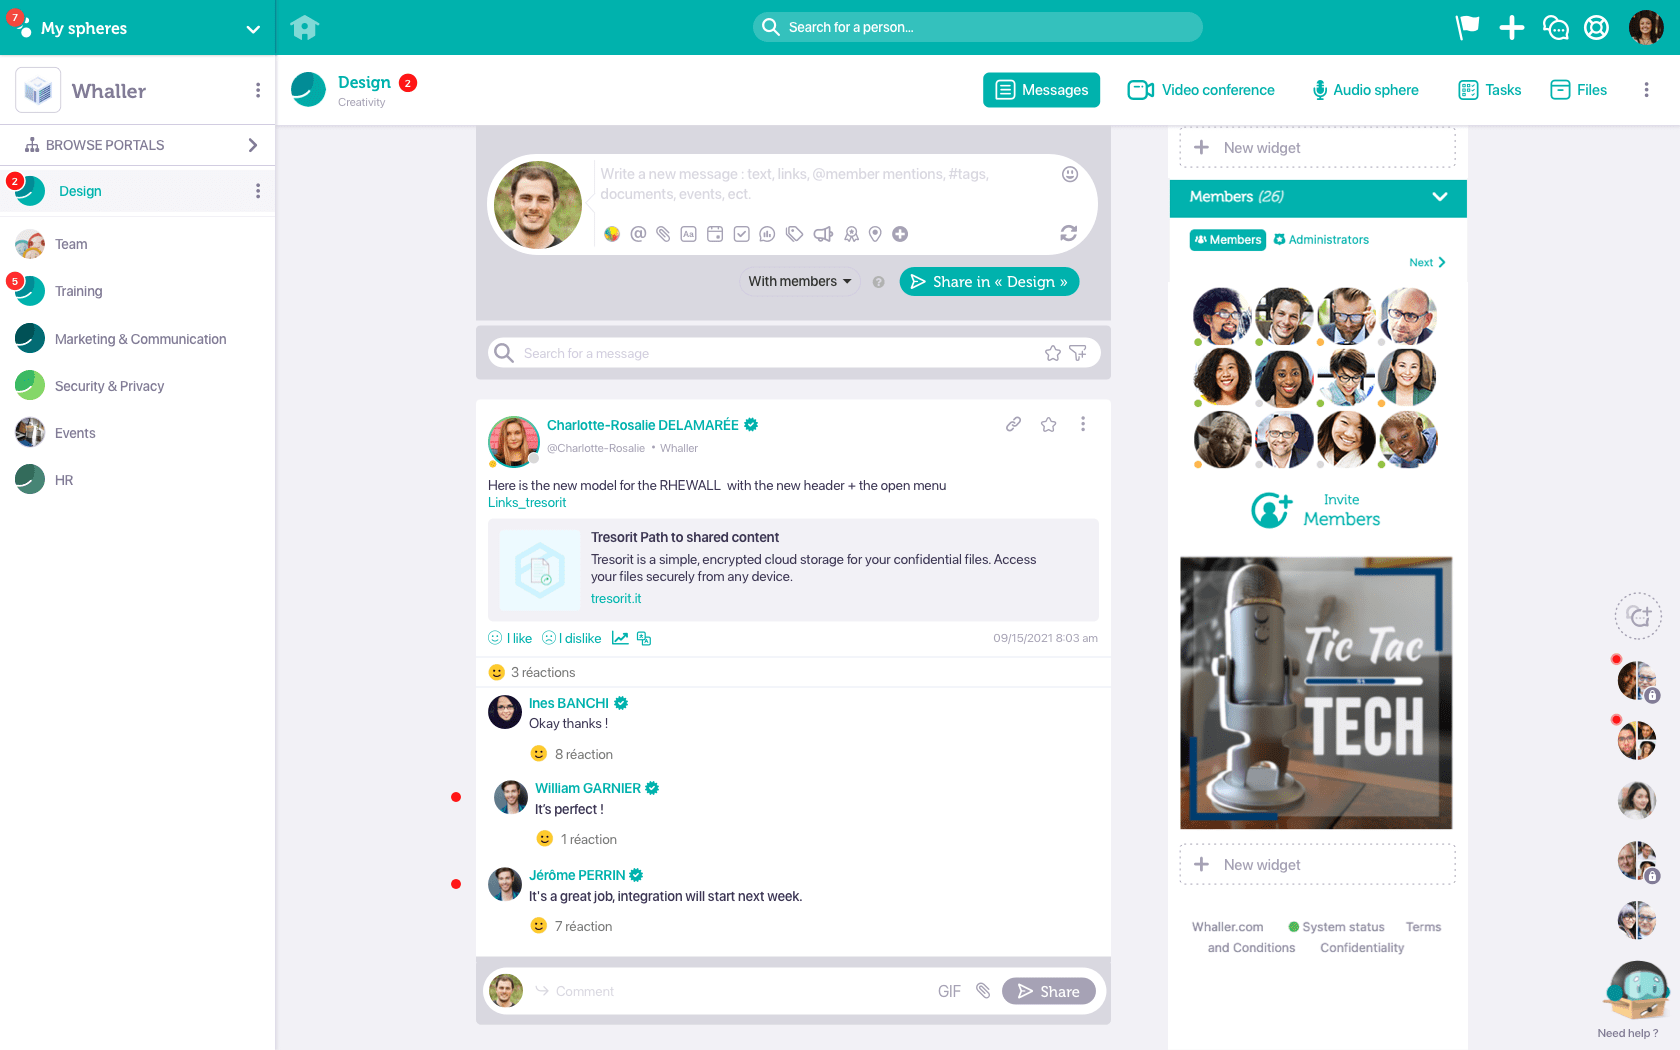 Whaller - Whaller "spheres" (independent discussion spaces) allow members to communicate and collaborate in complete security. Spheres include a variety of tools: messages, video conferencing, document storage & co-editing, shared calendar, task Kanban,...